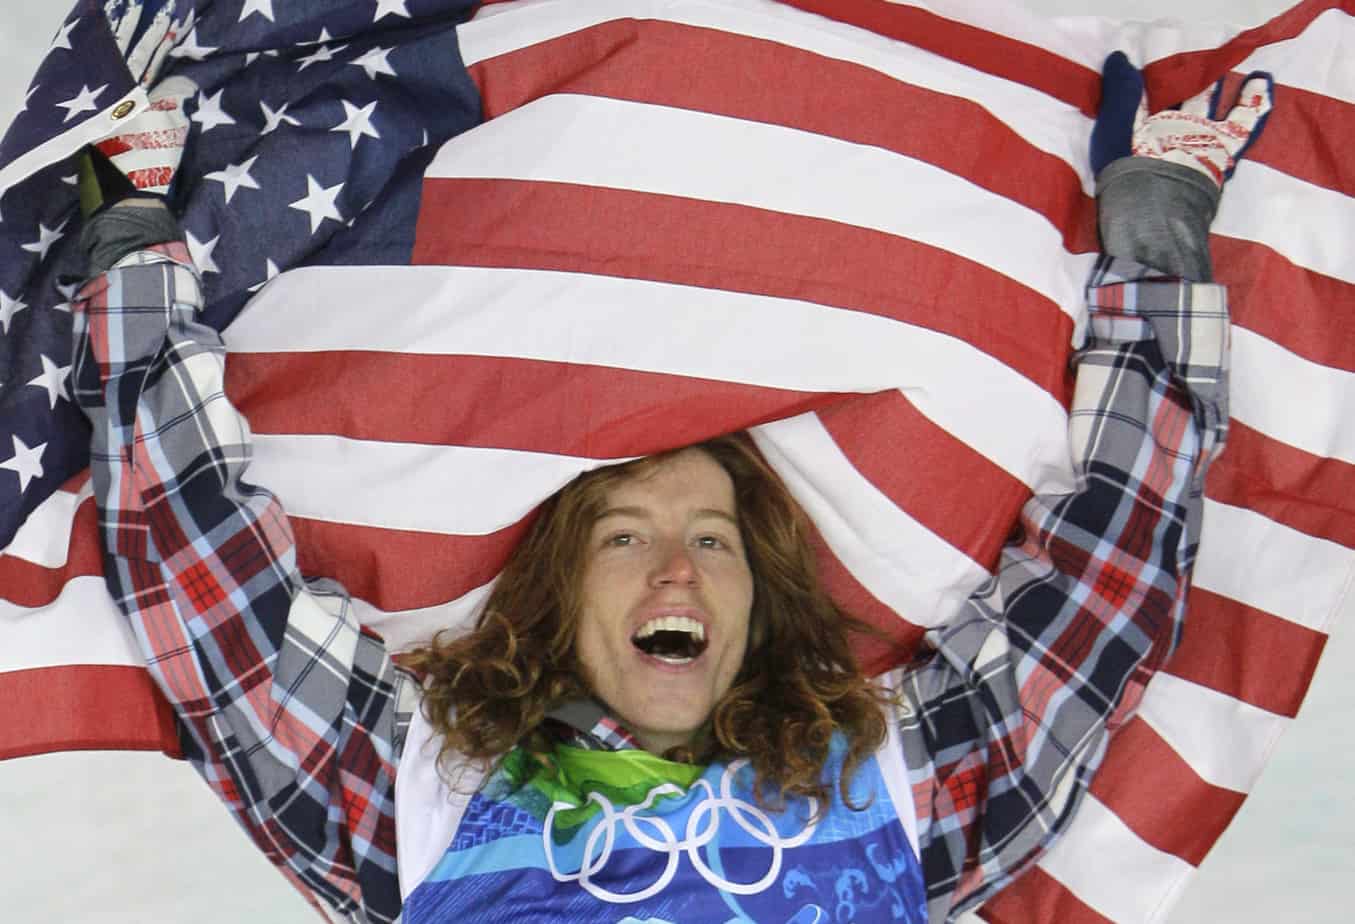 Check out where and when you can watch American snowboarding legend, Shaun White compete for the last time at the Beijing Olympics